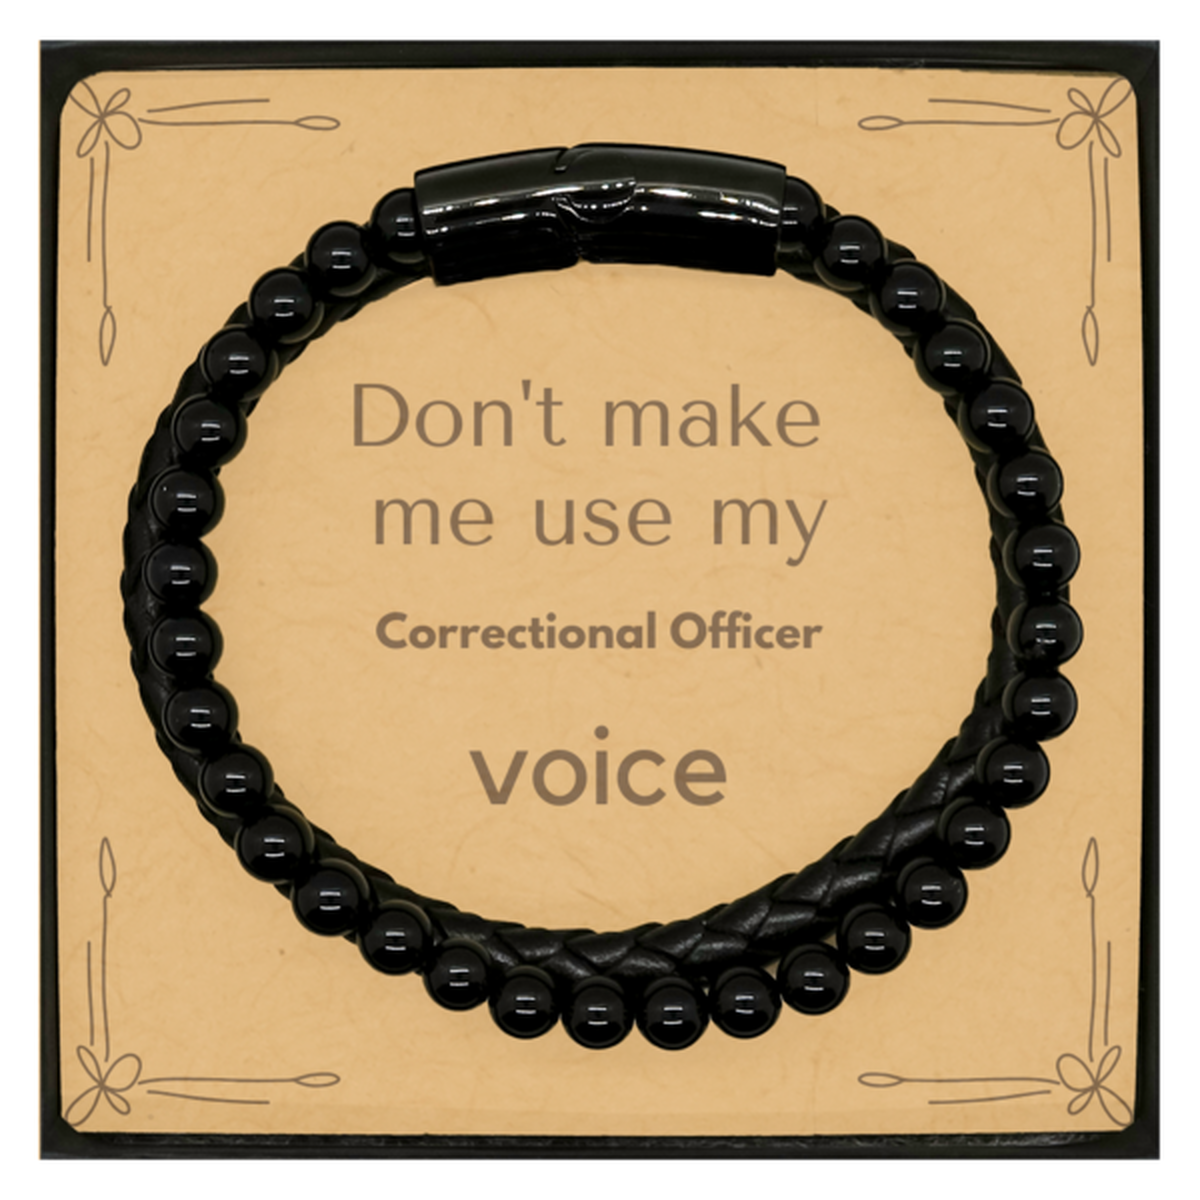 Don't make me use my Correctional Officer voice, Sarcasm Correctional Officer Card Gifts, Christmas Correctional Officer Stone Leather Bracelets Birthday Unique Gifts For Correctional Officer Coworkers, Men, Women, Colleague, Friends